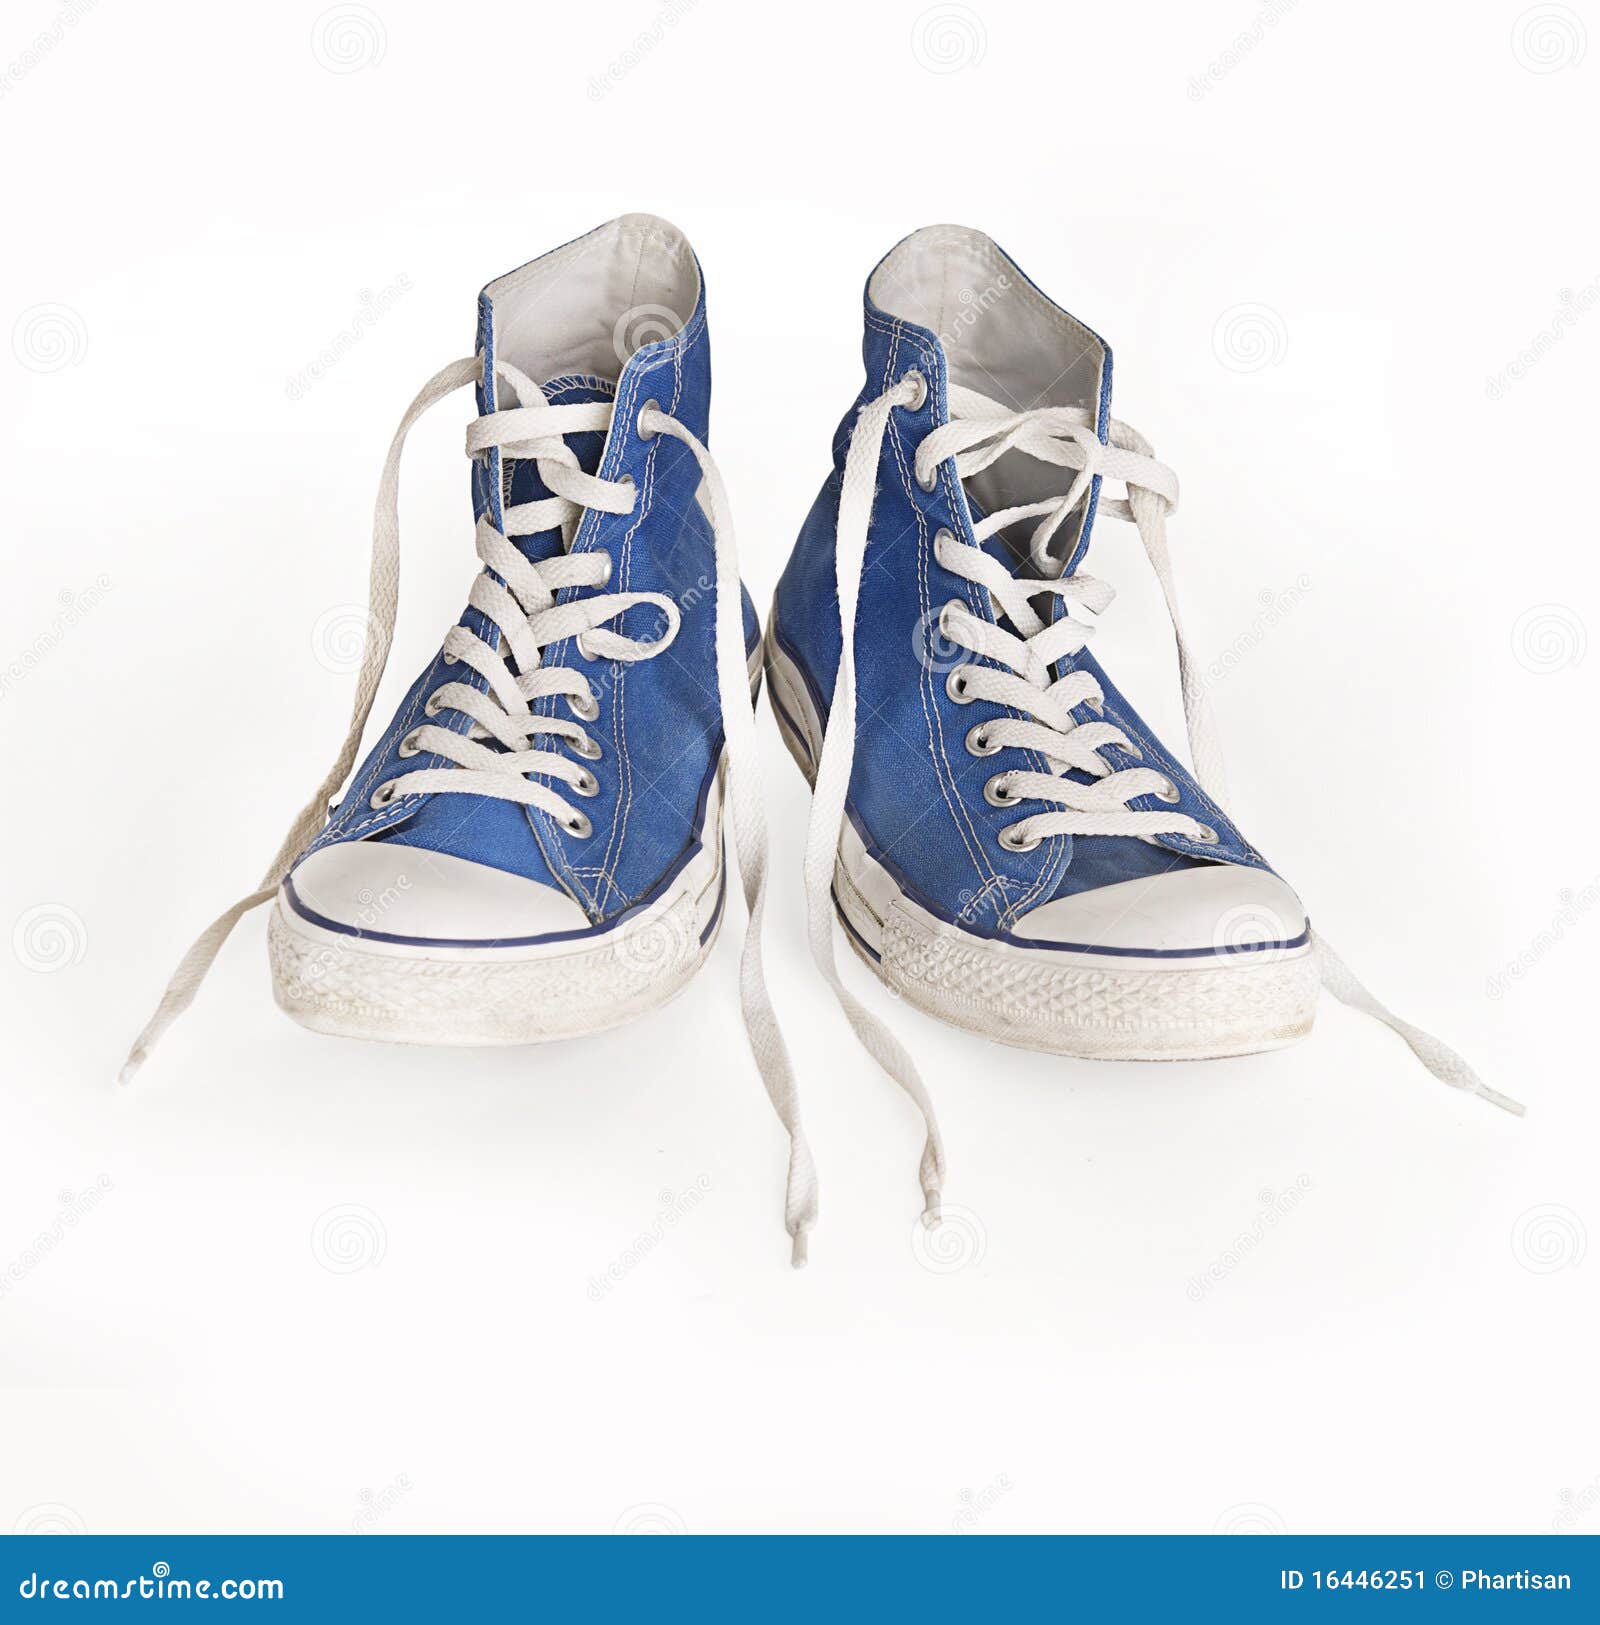 Classic Canvas Blue Shoe and Laces Stock Image - Image of lace, feet ...